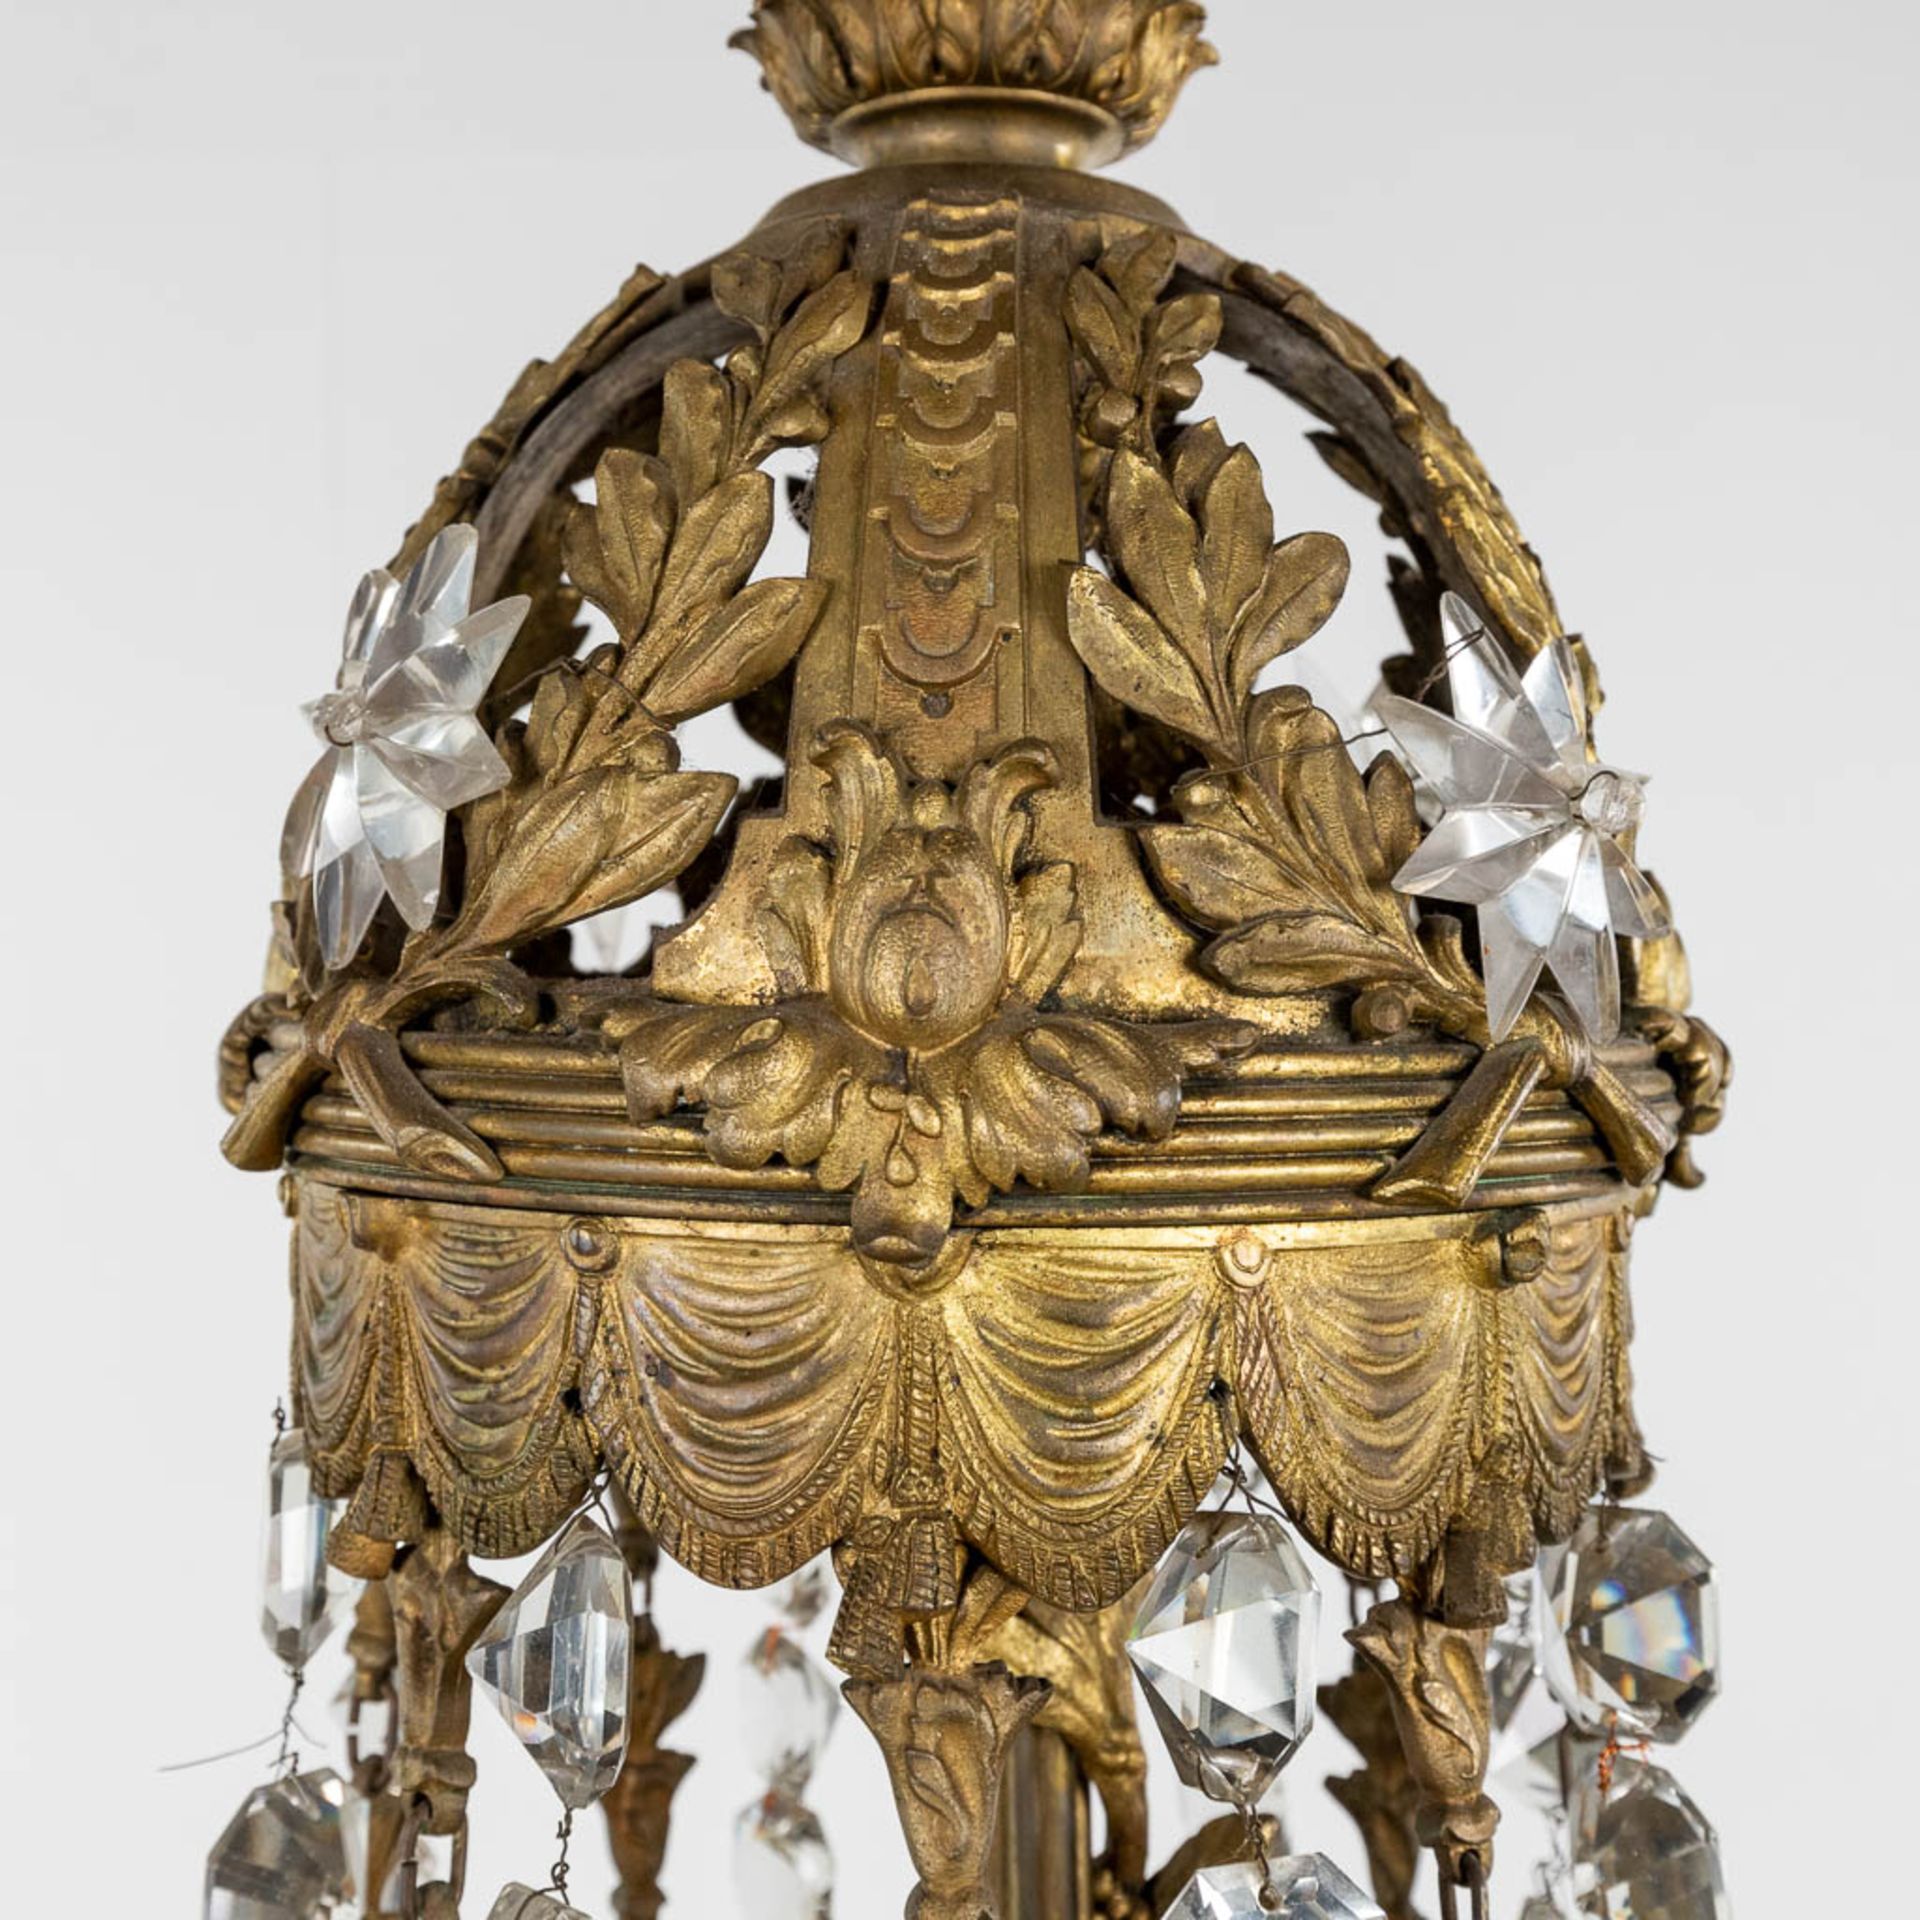 A large chandelier 'Sac ˆ Perles', bronze and glass. Circa 1900. (H: 100 x D: 100 cm) - Image 5 of 15